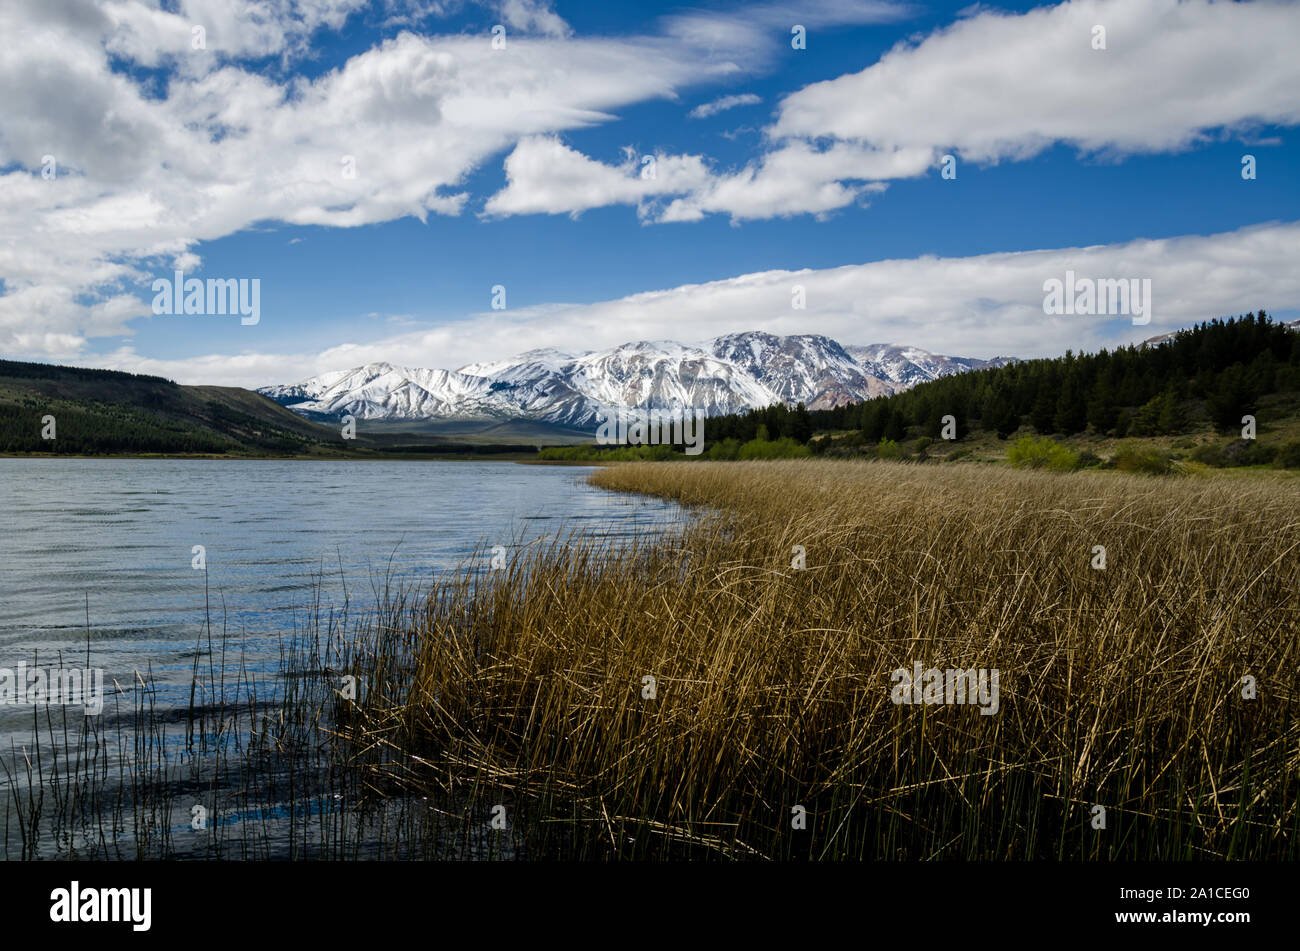 Patagonian landscape of lake with snowy mountains and forest Stock Photo